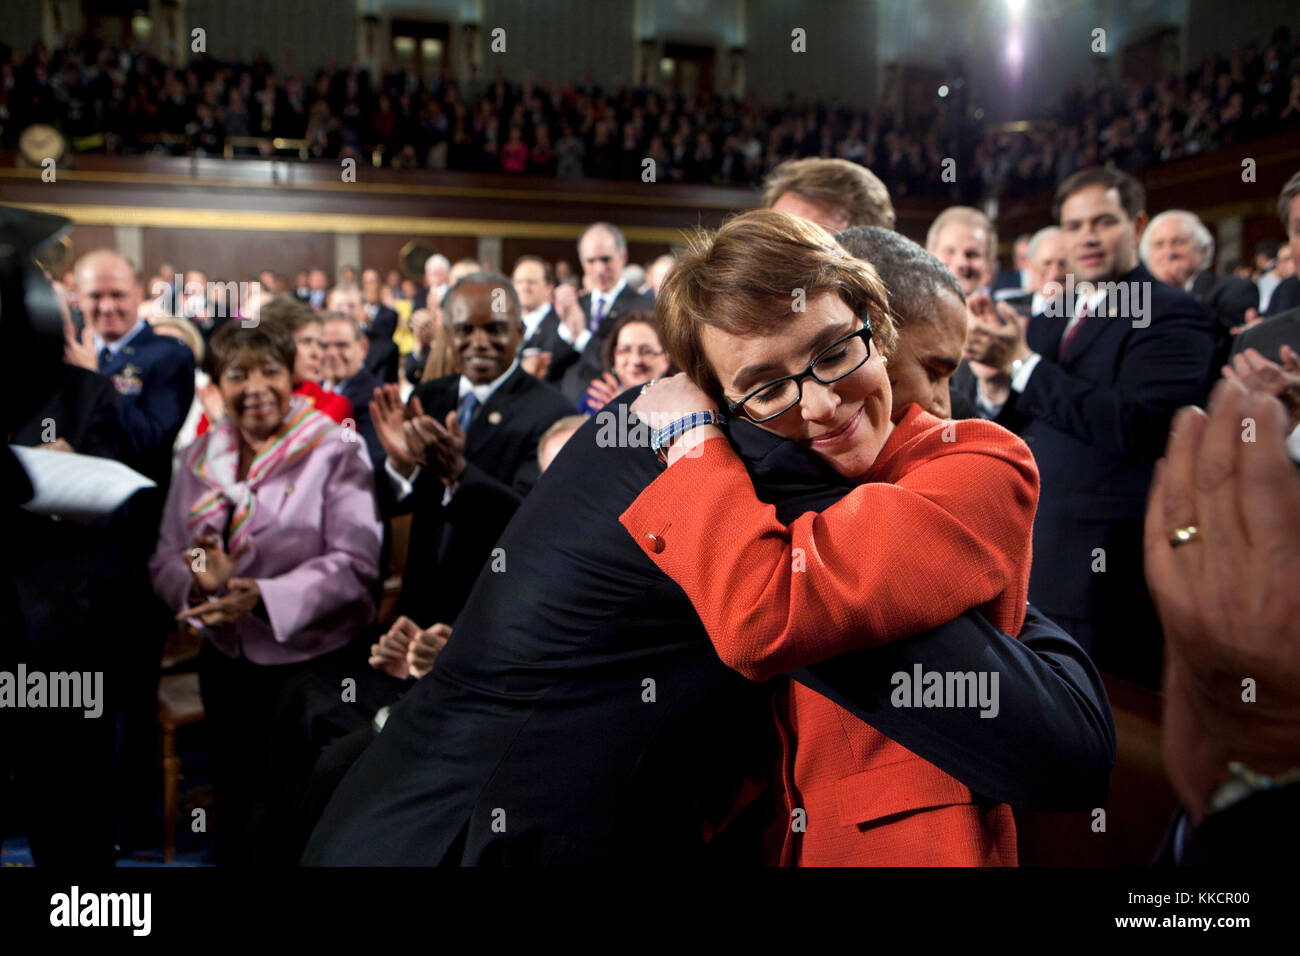 President Barack Obama hugs Rep. Gabrielle Giffords, D-Ariz., on the floor of the House Chamber at the U.S. Capitol in Washington, D.C., before delivering the State of the Union address, Jan. 24, 2012. Stock Photo